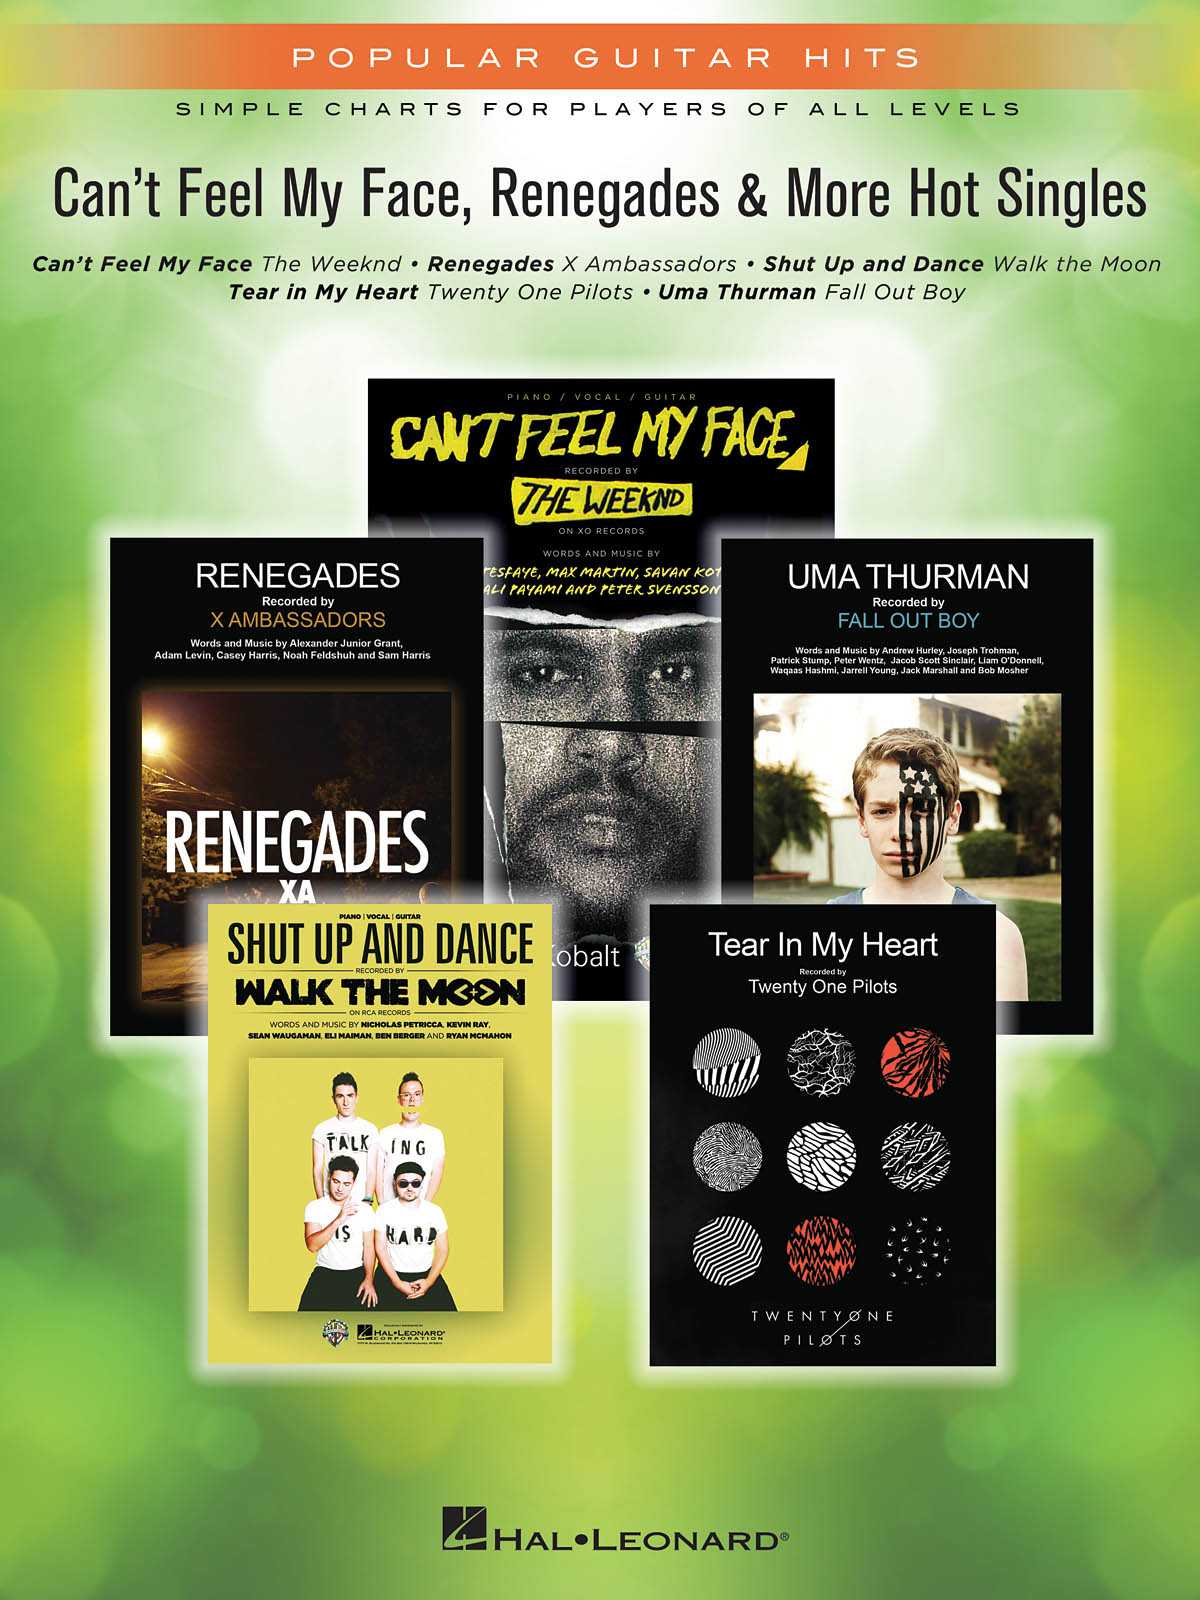 Can't Feel My Face, Renegades & More Hot Singles Popular Guitar Hits Simple Charts for Players of All Levels